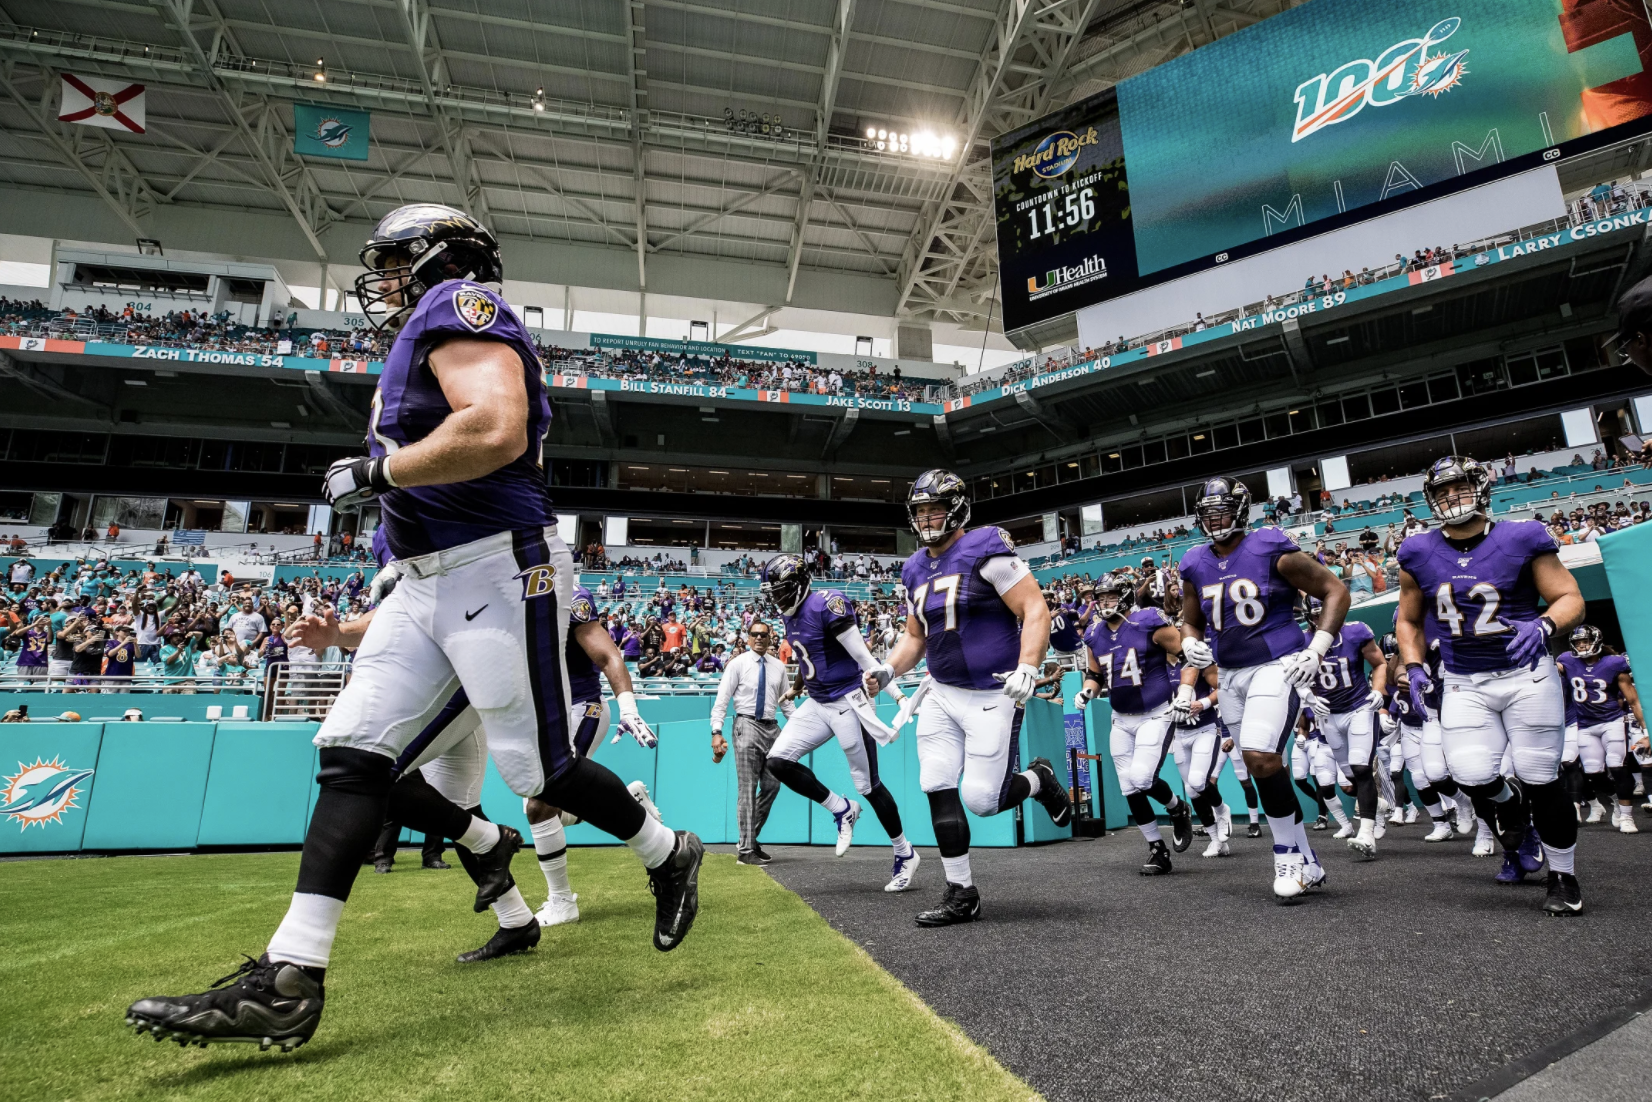 The Ravens run out of the tunnel in Miami against the Dolphins